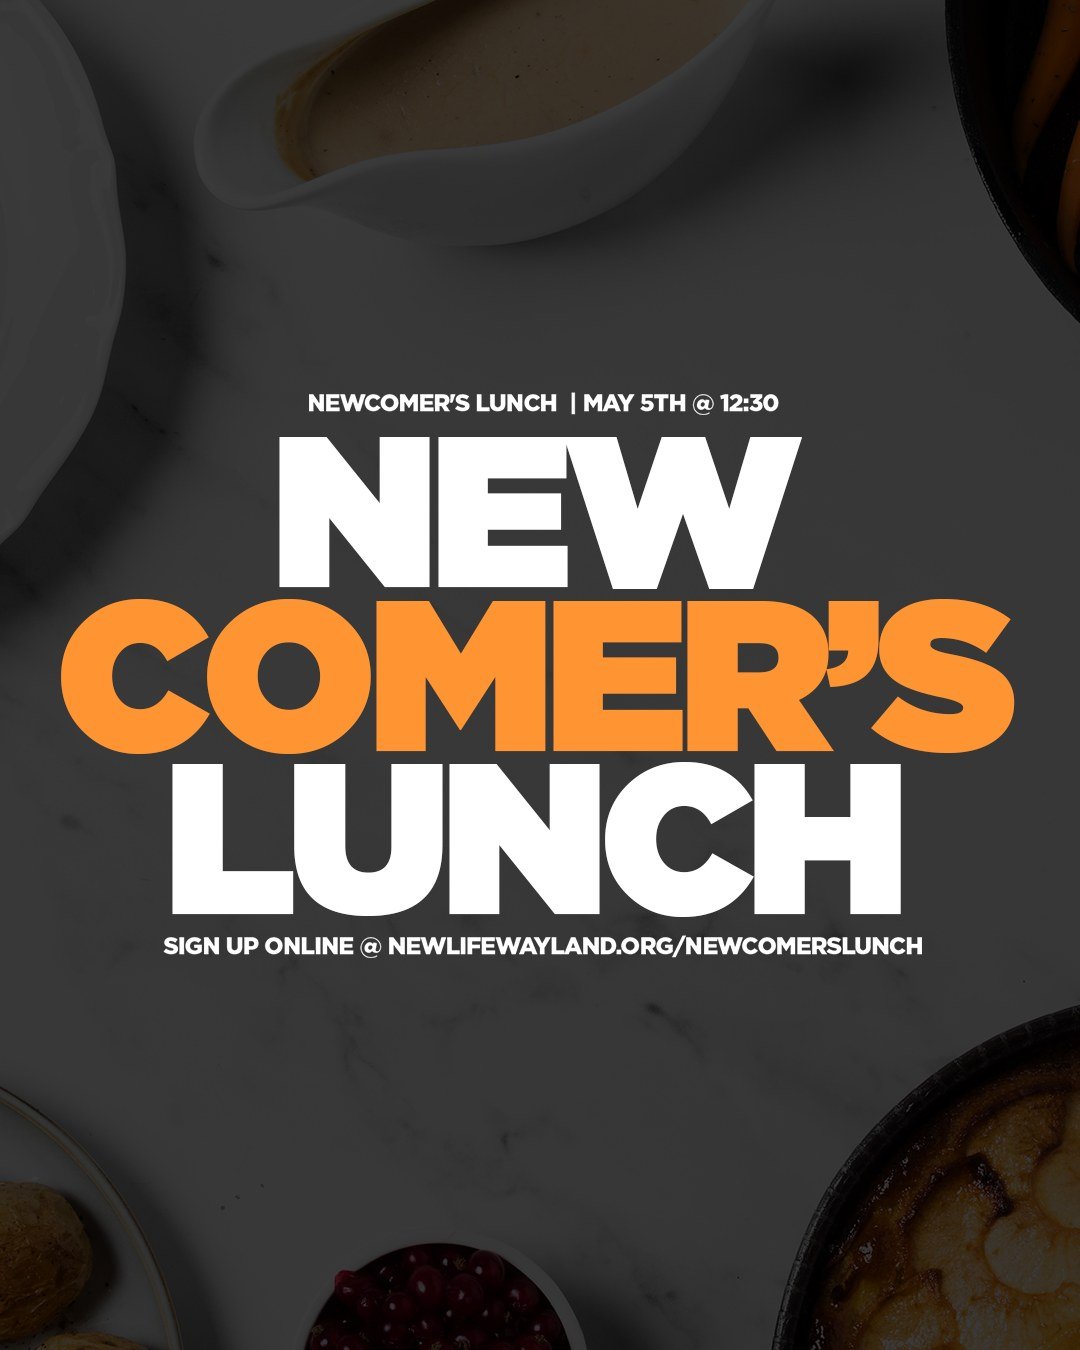 Our next Newcomer's Lunch is already next week Sunday! New (or new-ish) to NewLife? This is for you! We'd love to have lunch, fellowship, and a time with you to get to know you!

Sign up: https://www.newlifewayland.org/newcomerslunch